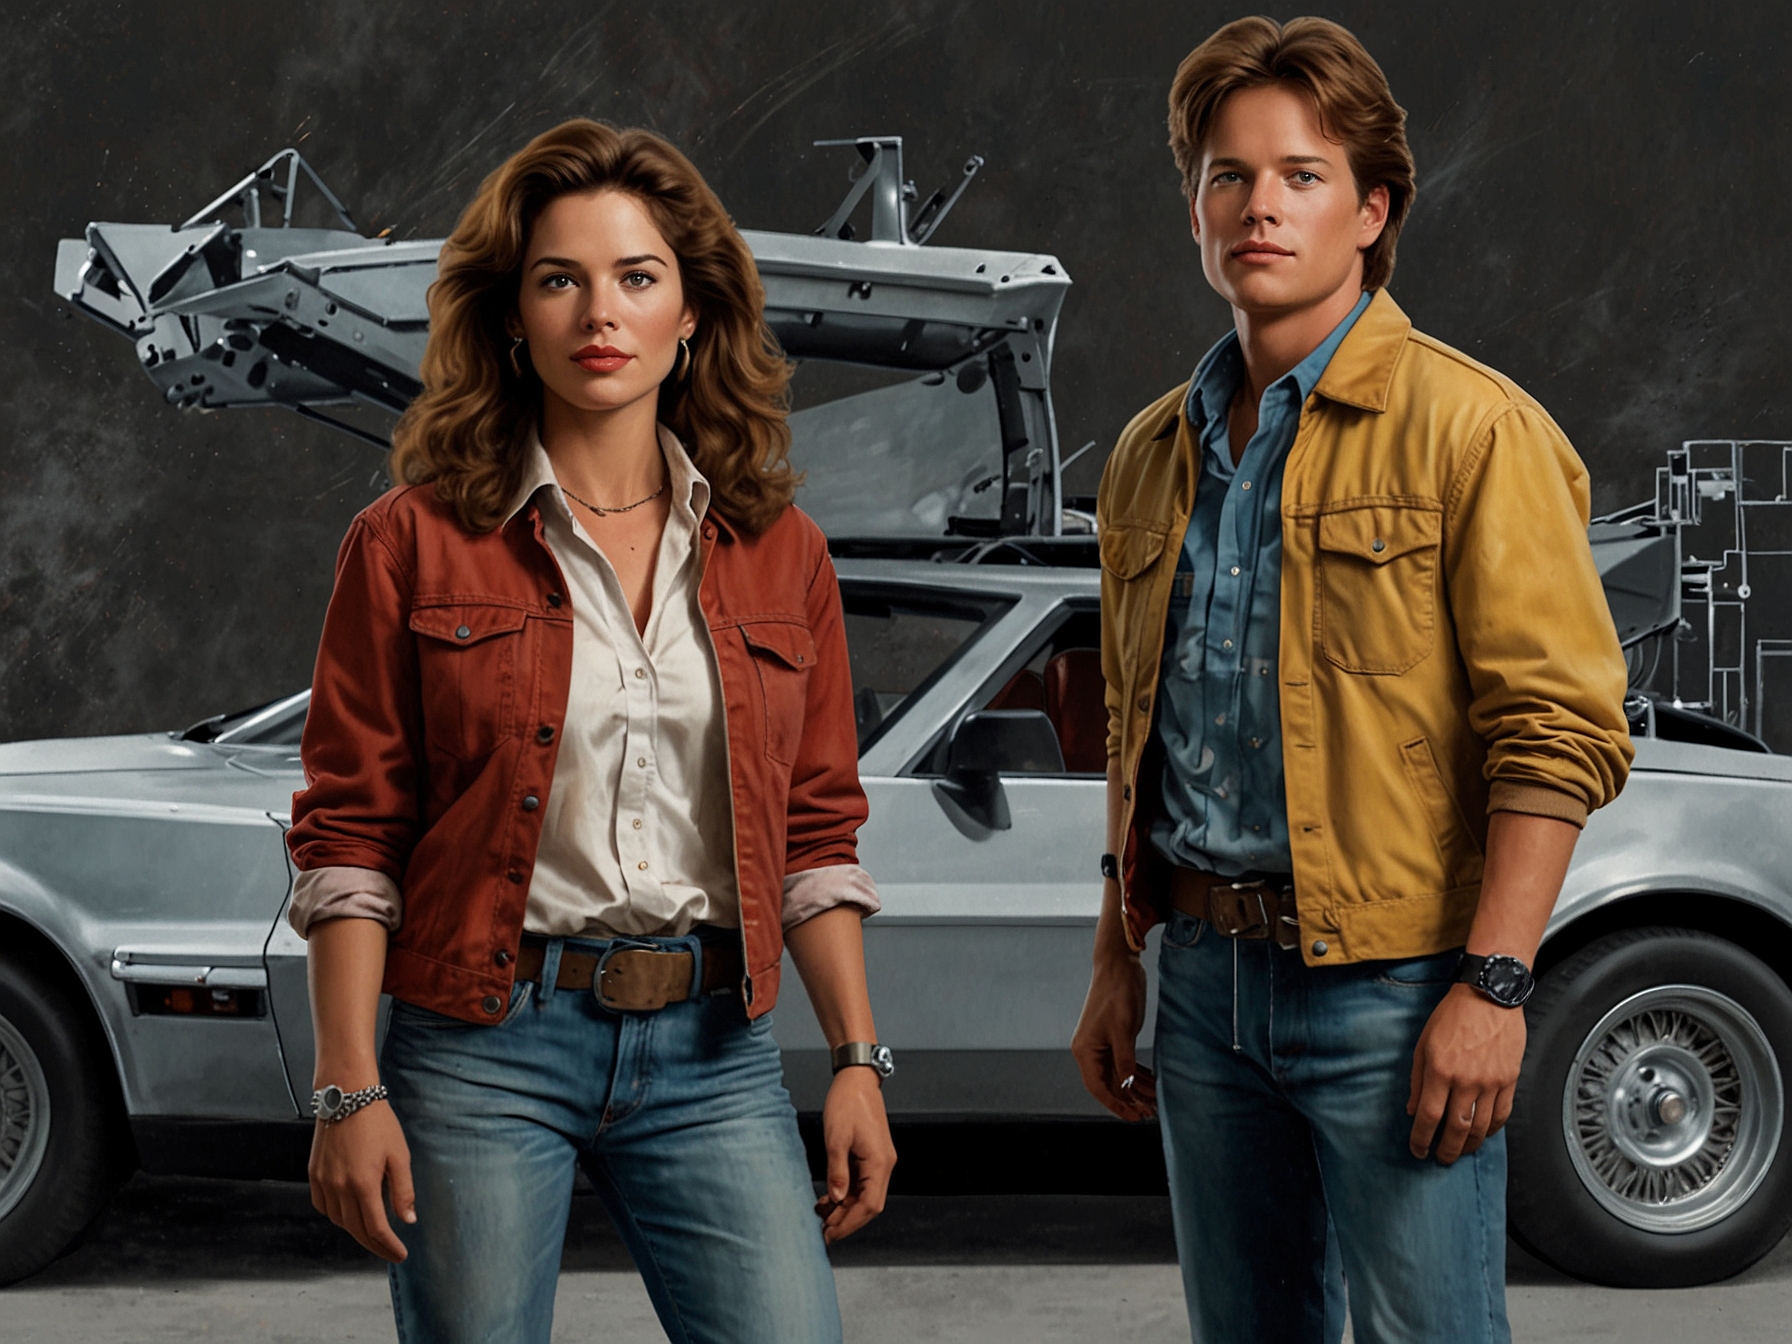 Claudia Wells, initially cast in 'Back to the Future,' and Eric Stoltz as the original Marty McFly, replaced due to height and comedic tone issues, respectively, showcasing mid-filming cast changes.